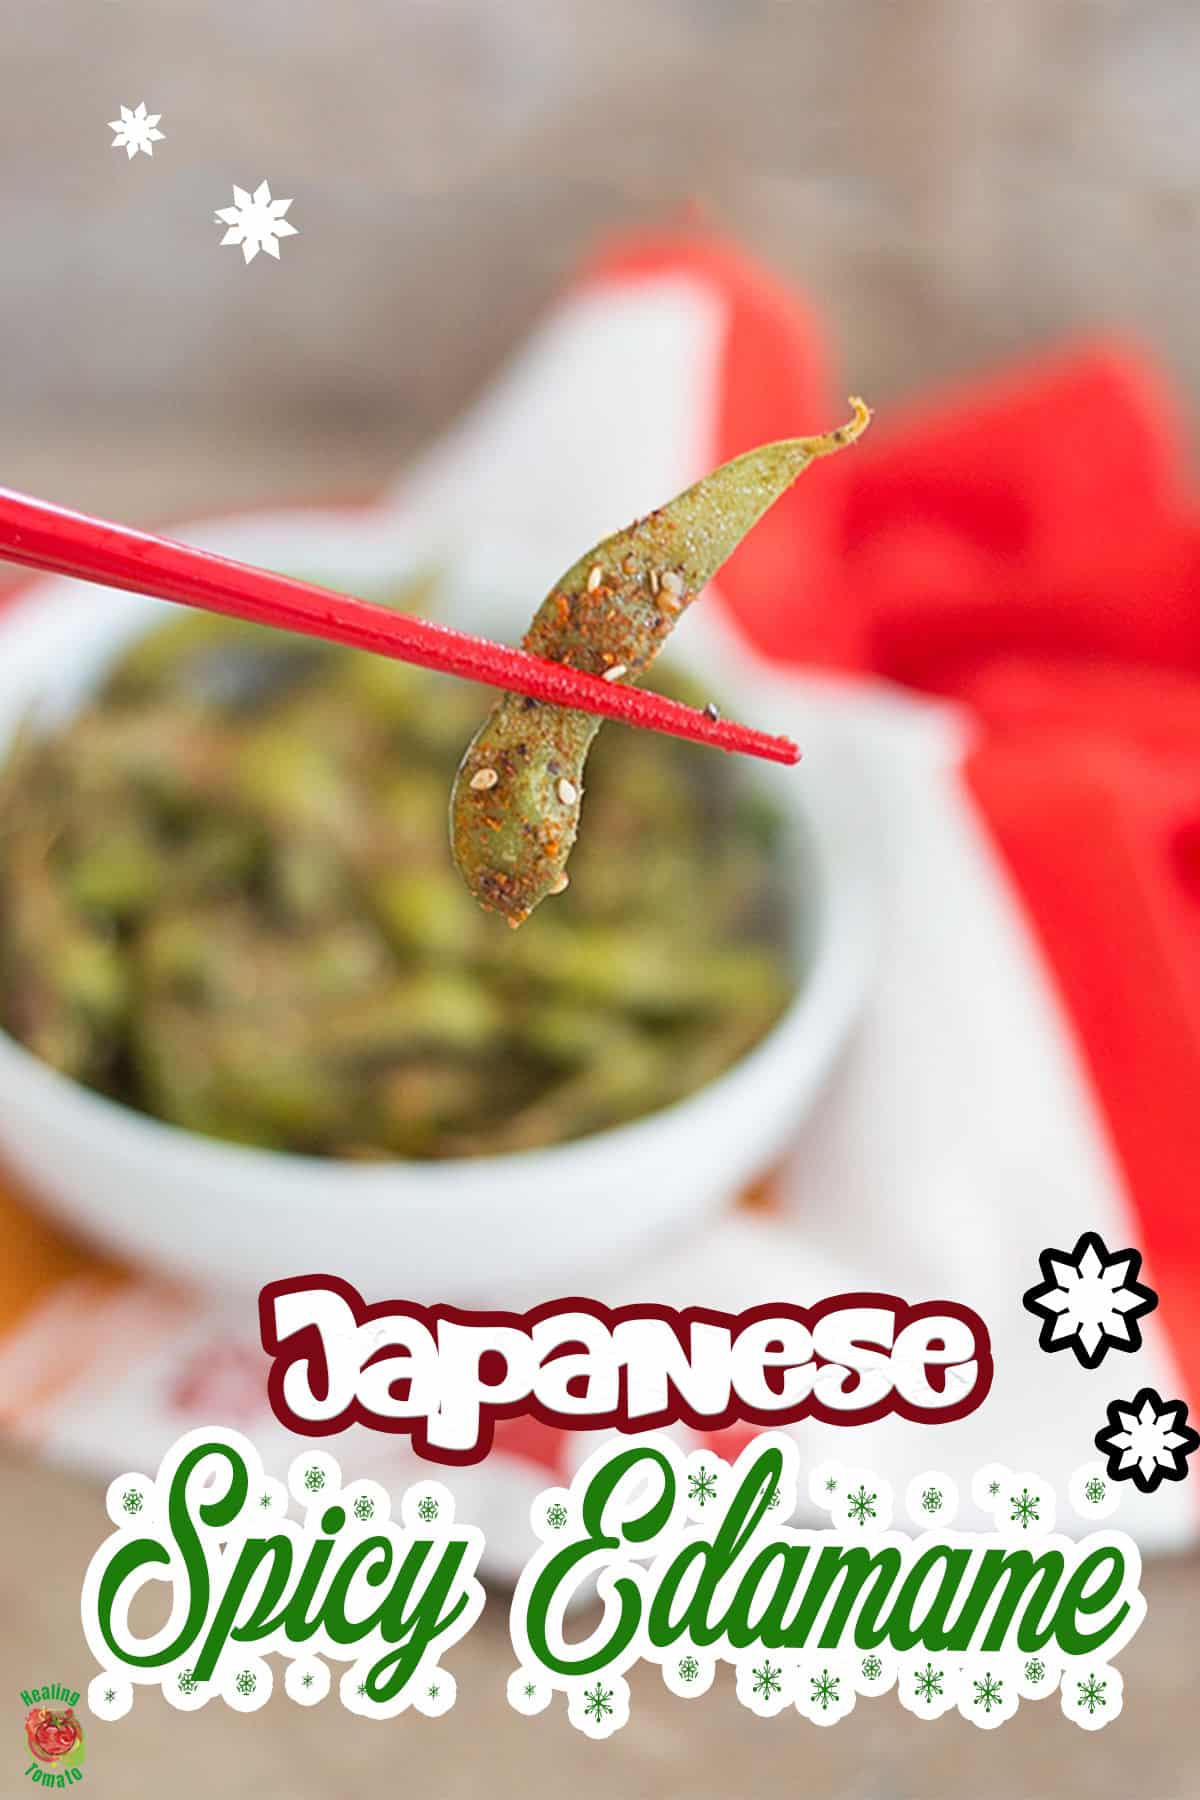 Front view of a pair of chopsticks holding one piece of edamame pod